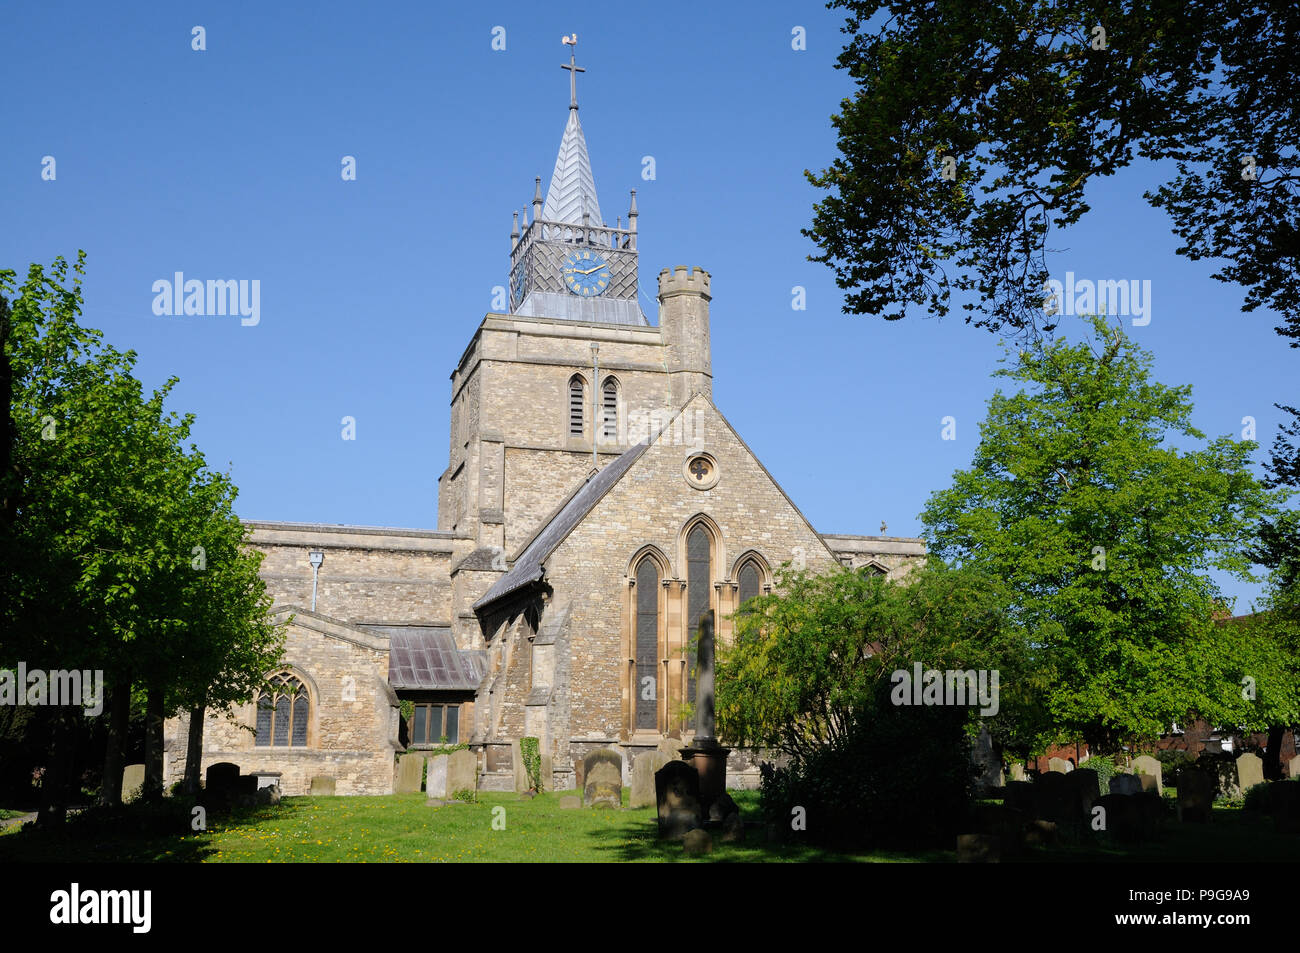 St Mary the Virgin, Aylesbury, Buckinghamshire. It is beleived a church has been on this site since the twelth century. Stock Photo